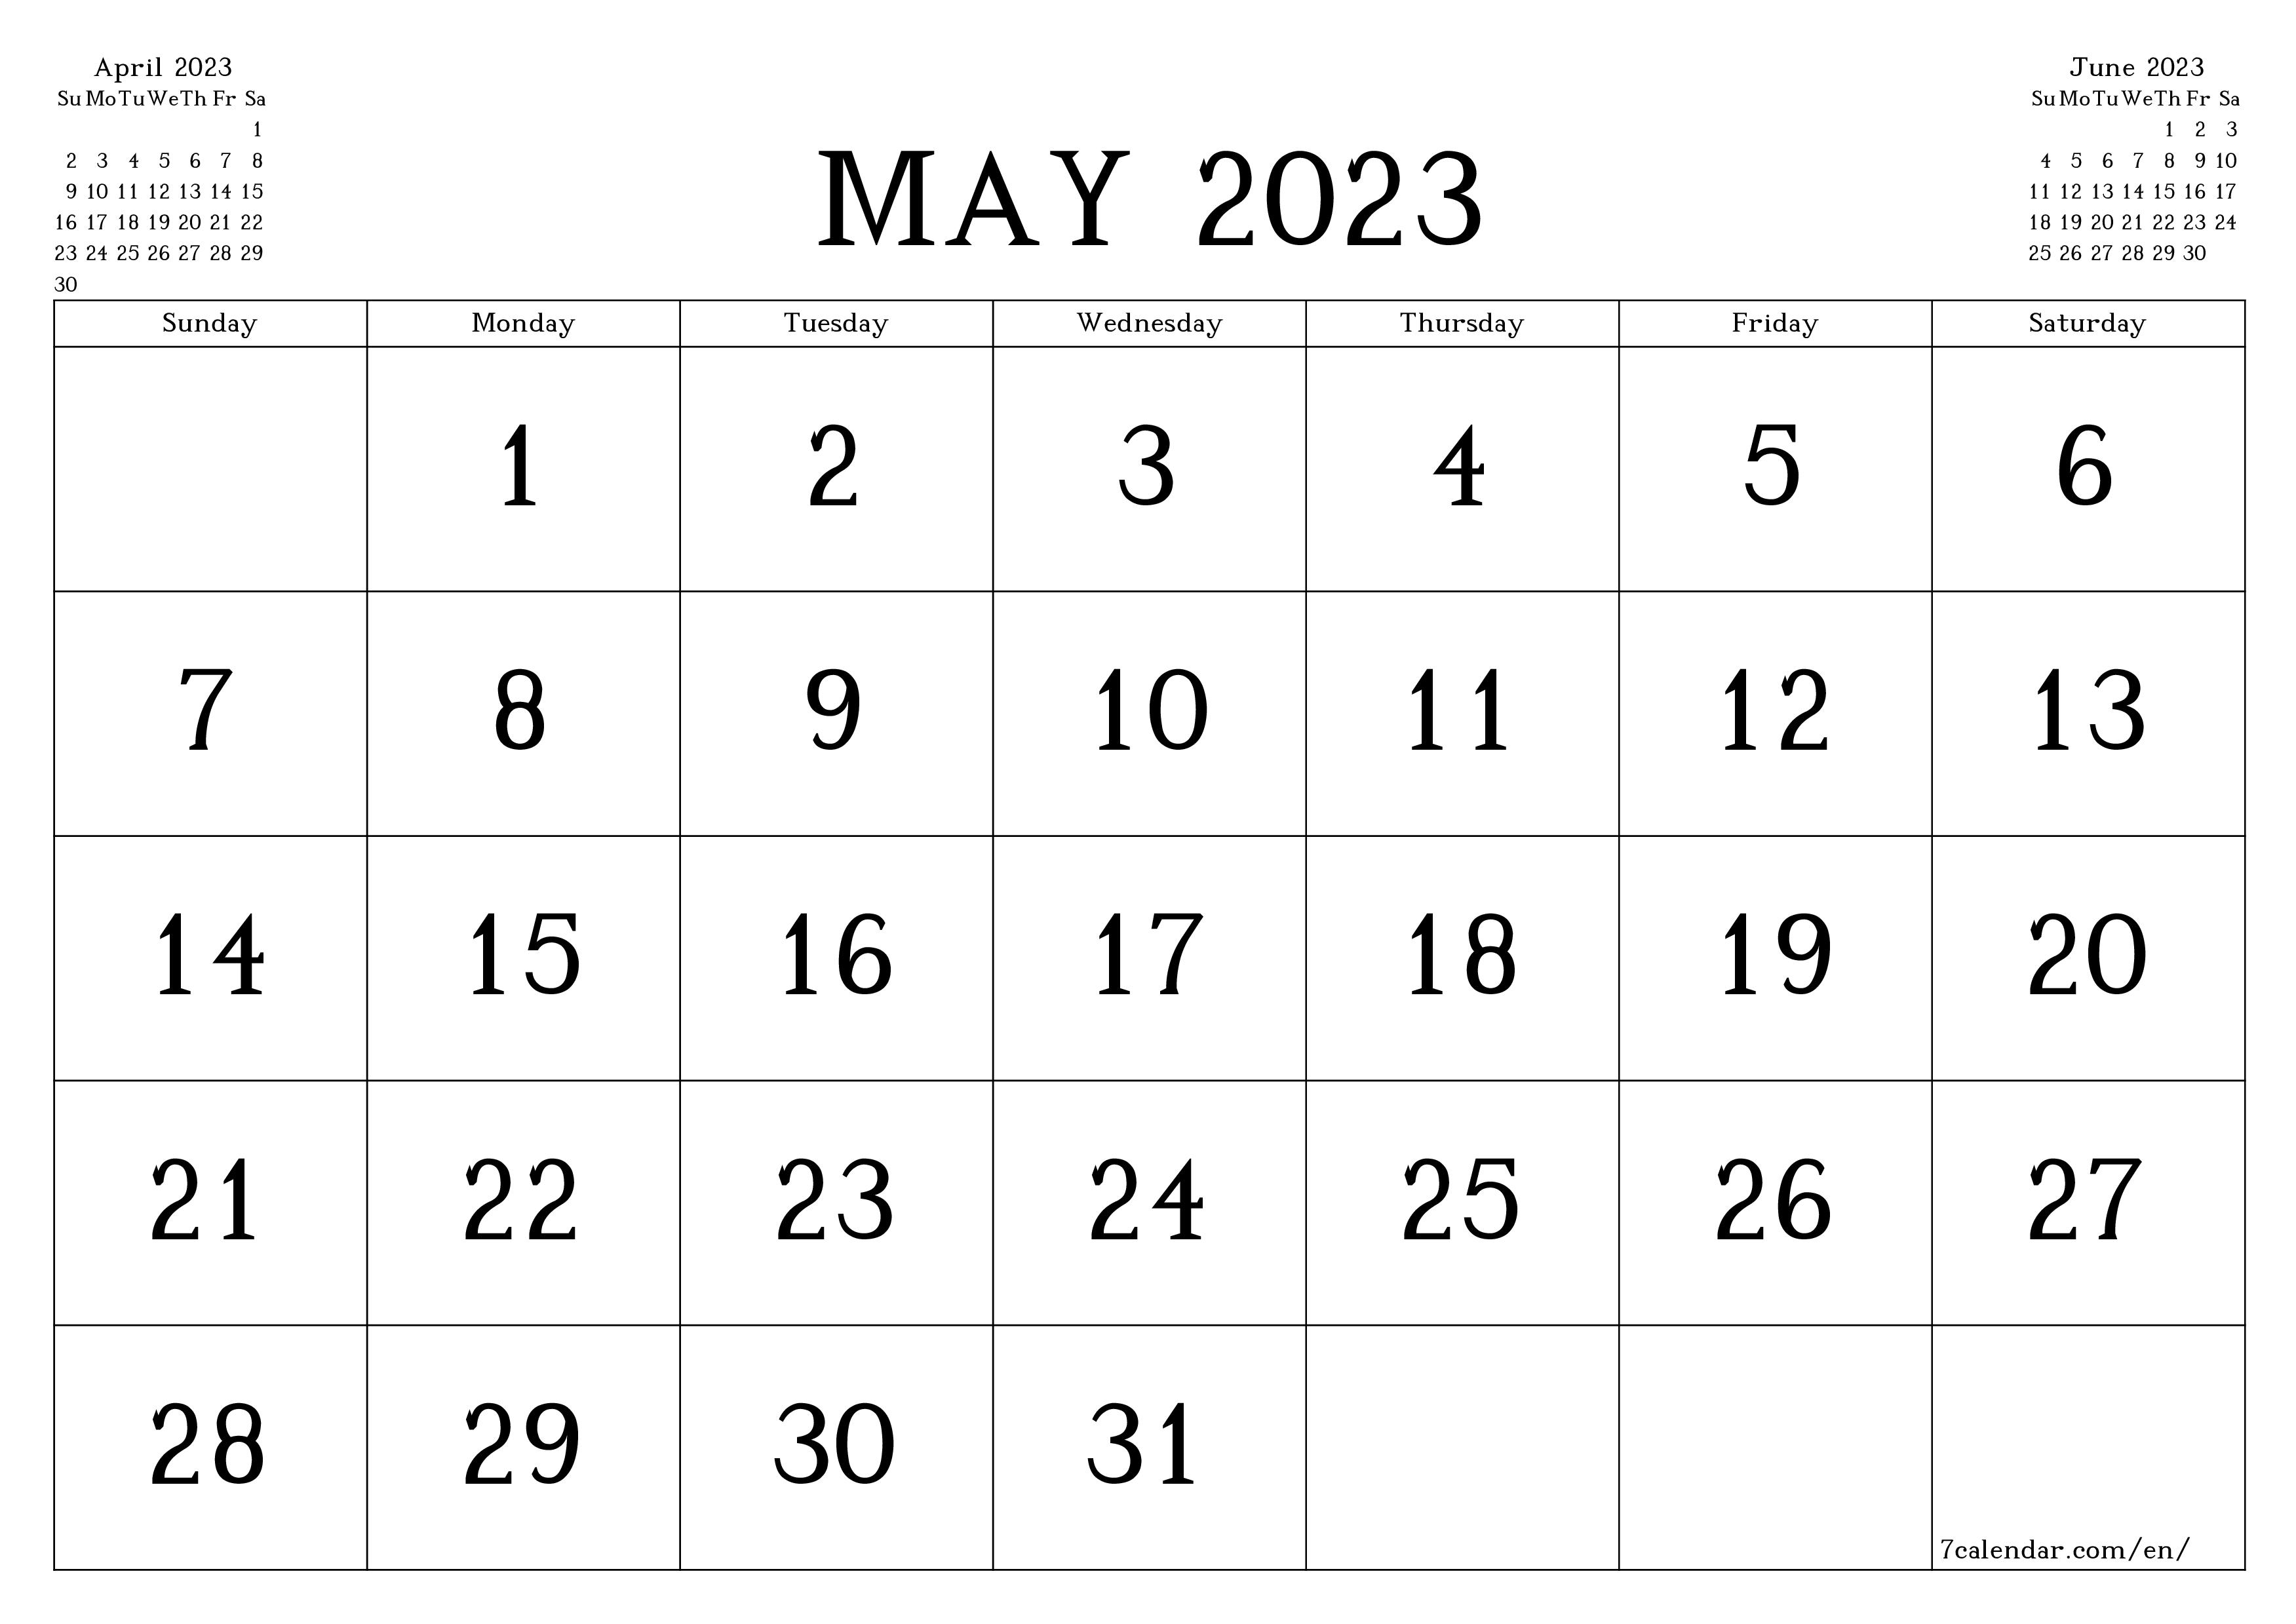 Blank monthly dated HD template image of calendar for month May 2023 save and print to PDF PNG English - 7calendar.com